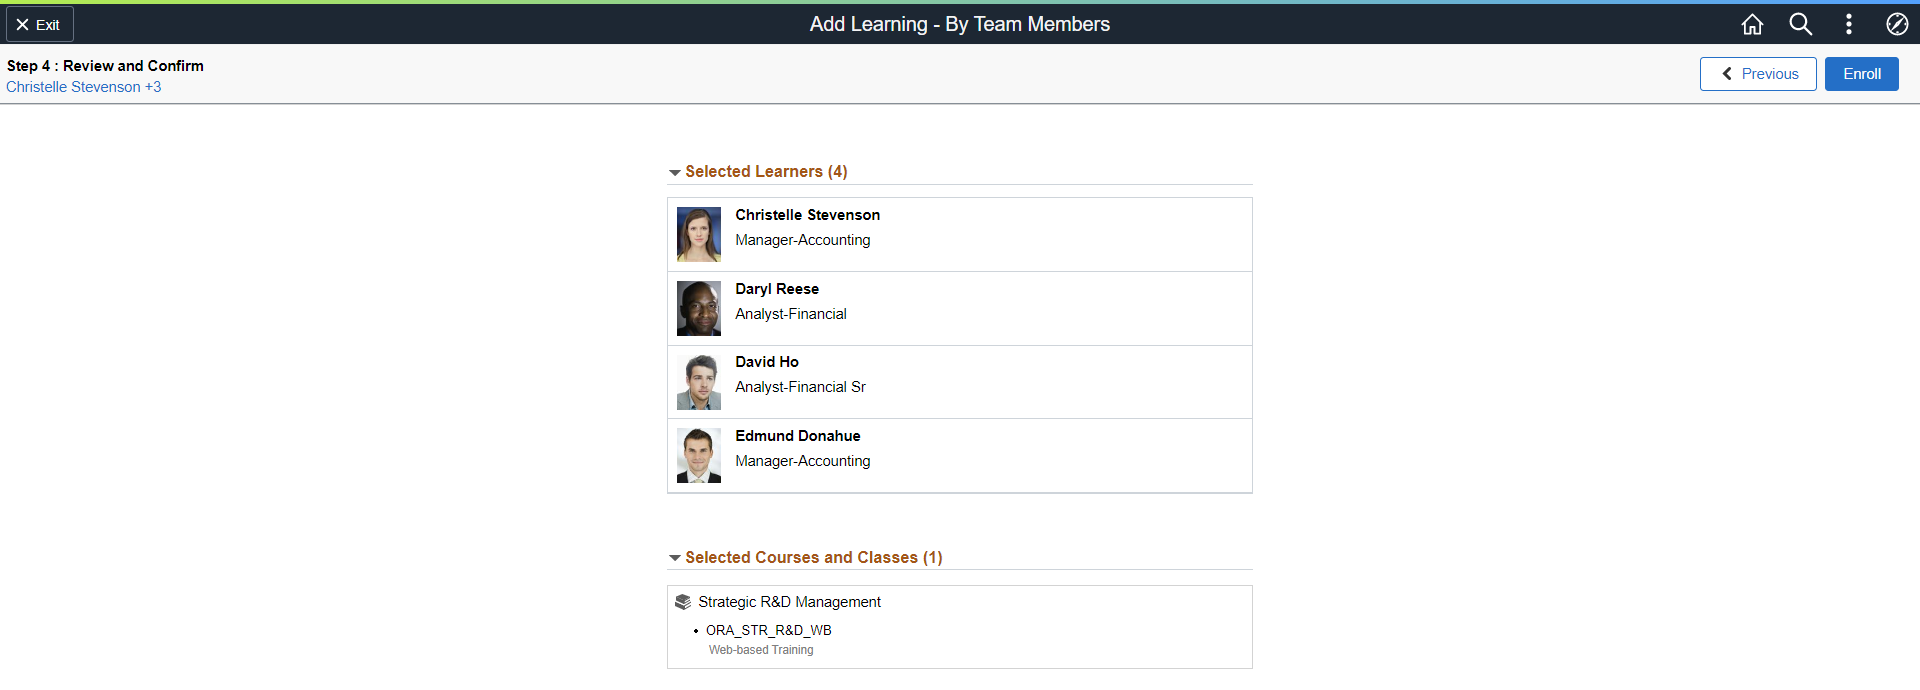 Step 4 of 4 of Add Learning - By Team Members Page